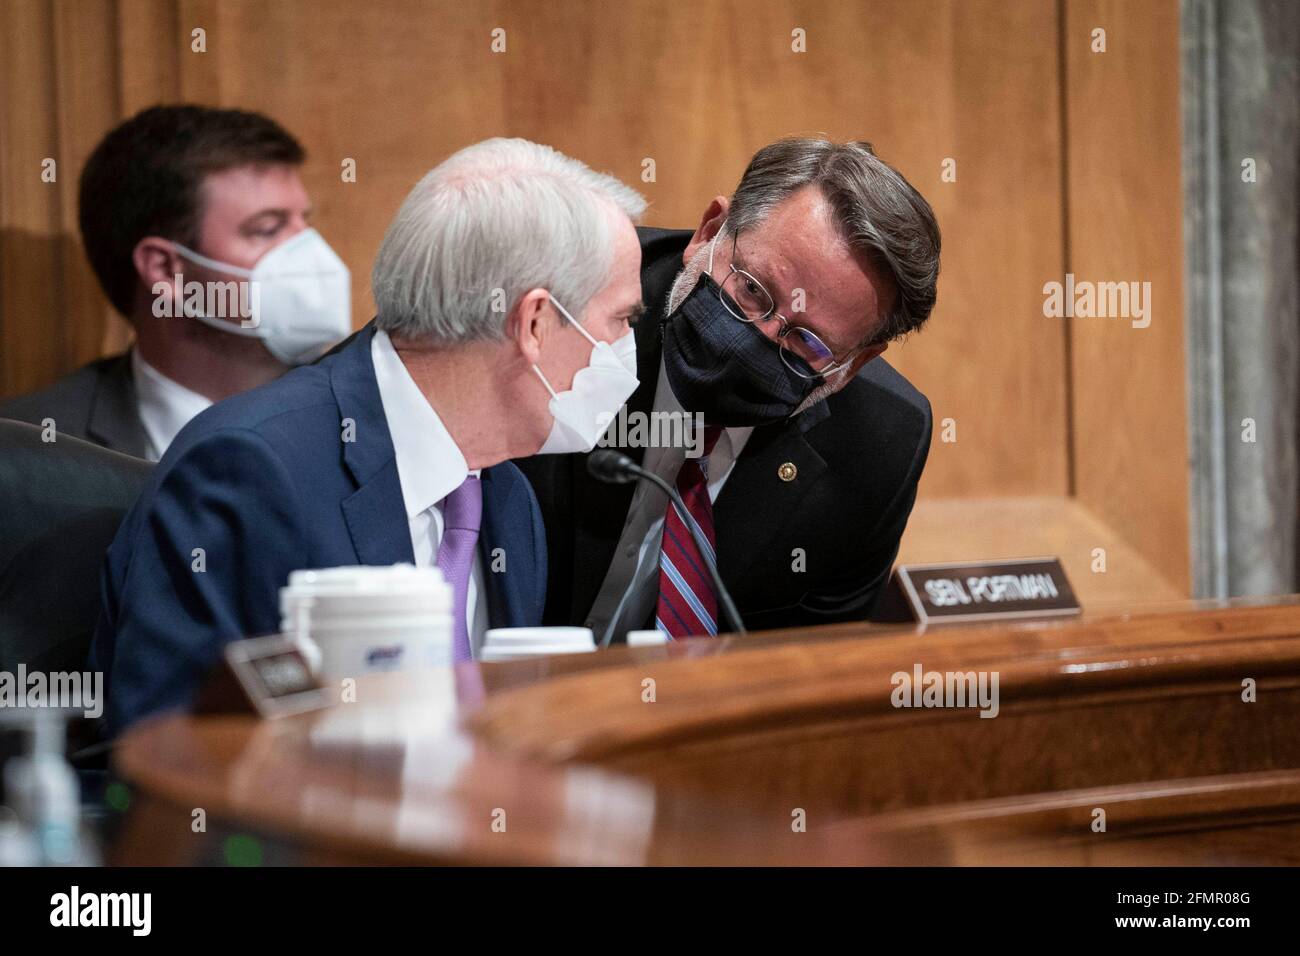 Washington, USA. 11th May, 2021. Senator Rob Portman, a Republican from Ohio and ranking member of the Senate Homeland and Governmental Affairs Committee, left, speaks with Senator Gary Peters, a Democrat from Michigan and chairman of the Senate Homeland and Governmental Affairs Committee, during a committee hearing in Washington, DC, U.S., on Tuesday, May 11, 2021. The hearing is titled 'Prevention, Response, and Recovery: Improving Federal Cybersecurity Post-SolarWinds.' Photo by Sarah Silbiger/Pool/Sipa USA) Credit: Sipa USA/Alamy Live News Stock Photo